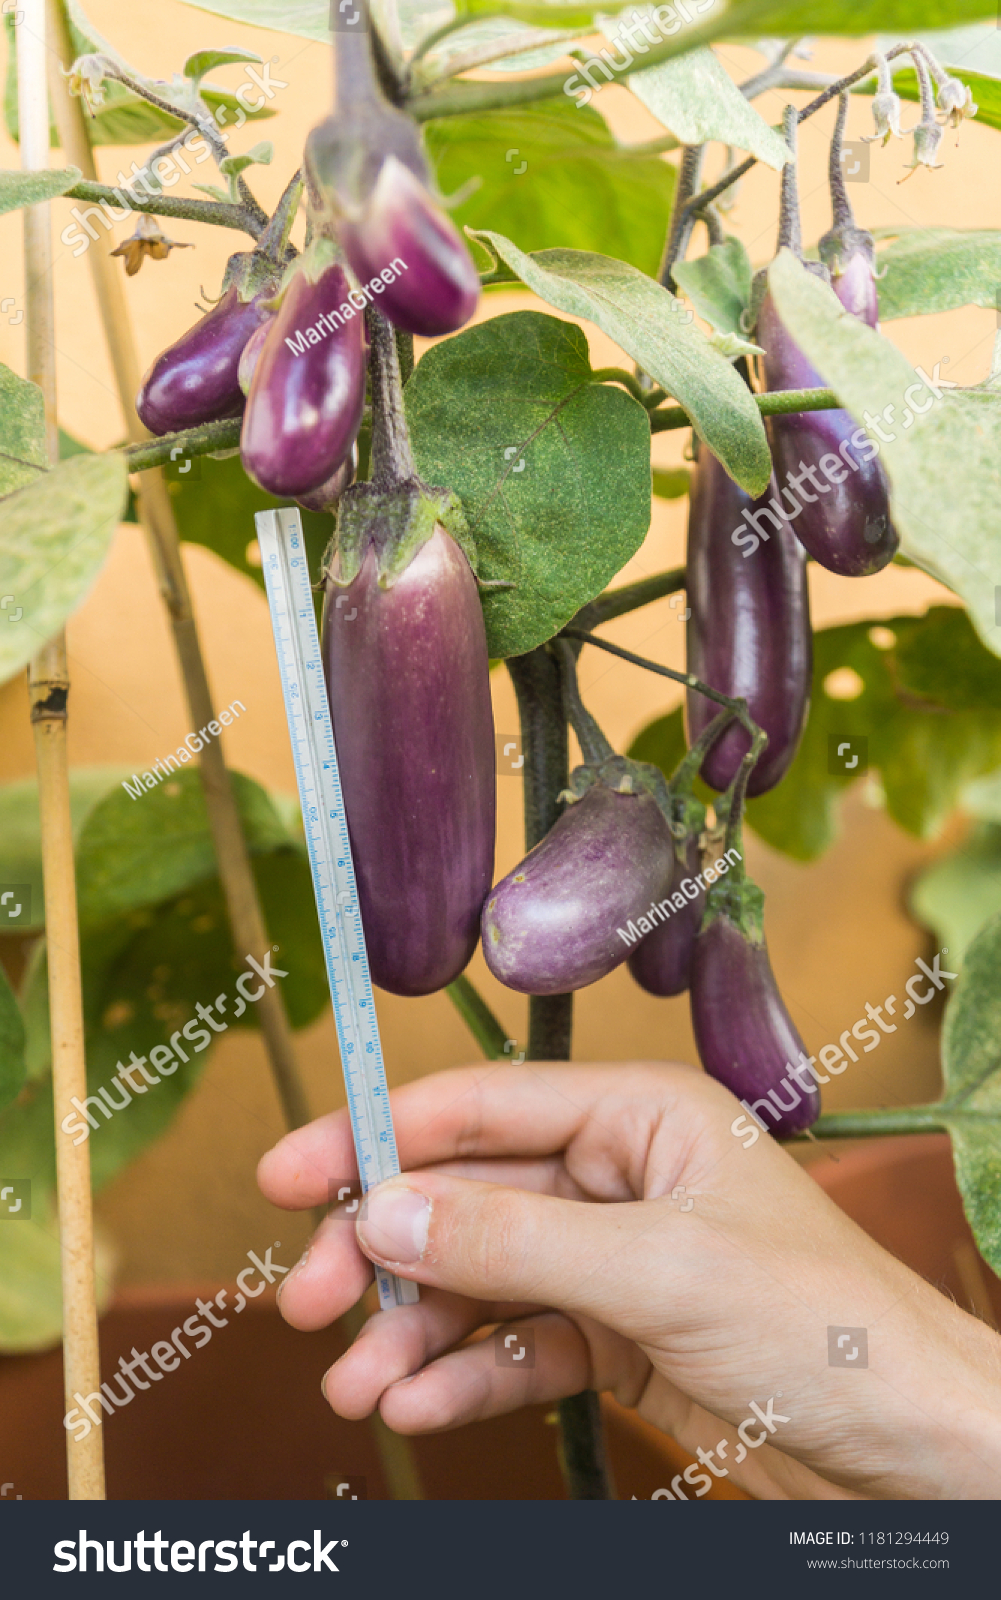 Organic purple eggplants with glossy texture of a small heirloom variety 'Slim Jim', edible fruits of Aubergine plant growing in a pot on balcony as a part of urban gardening project on a sunny summer #1181294449